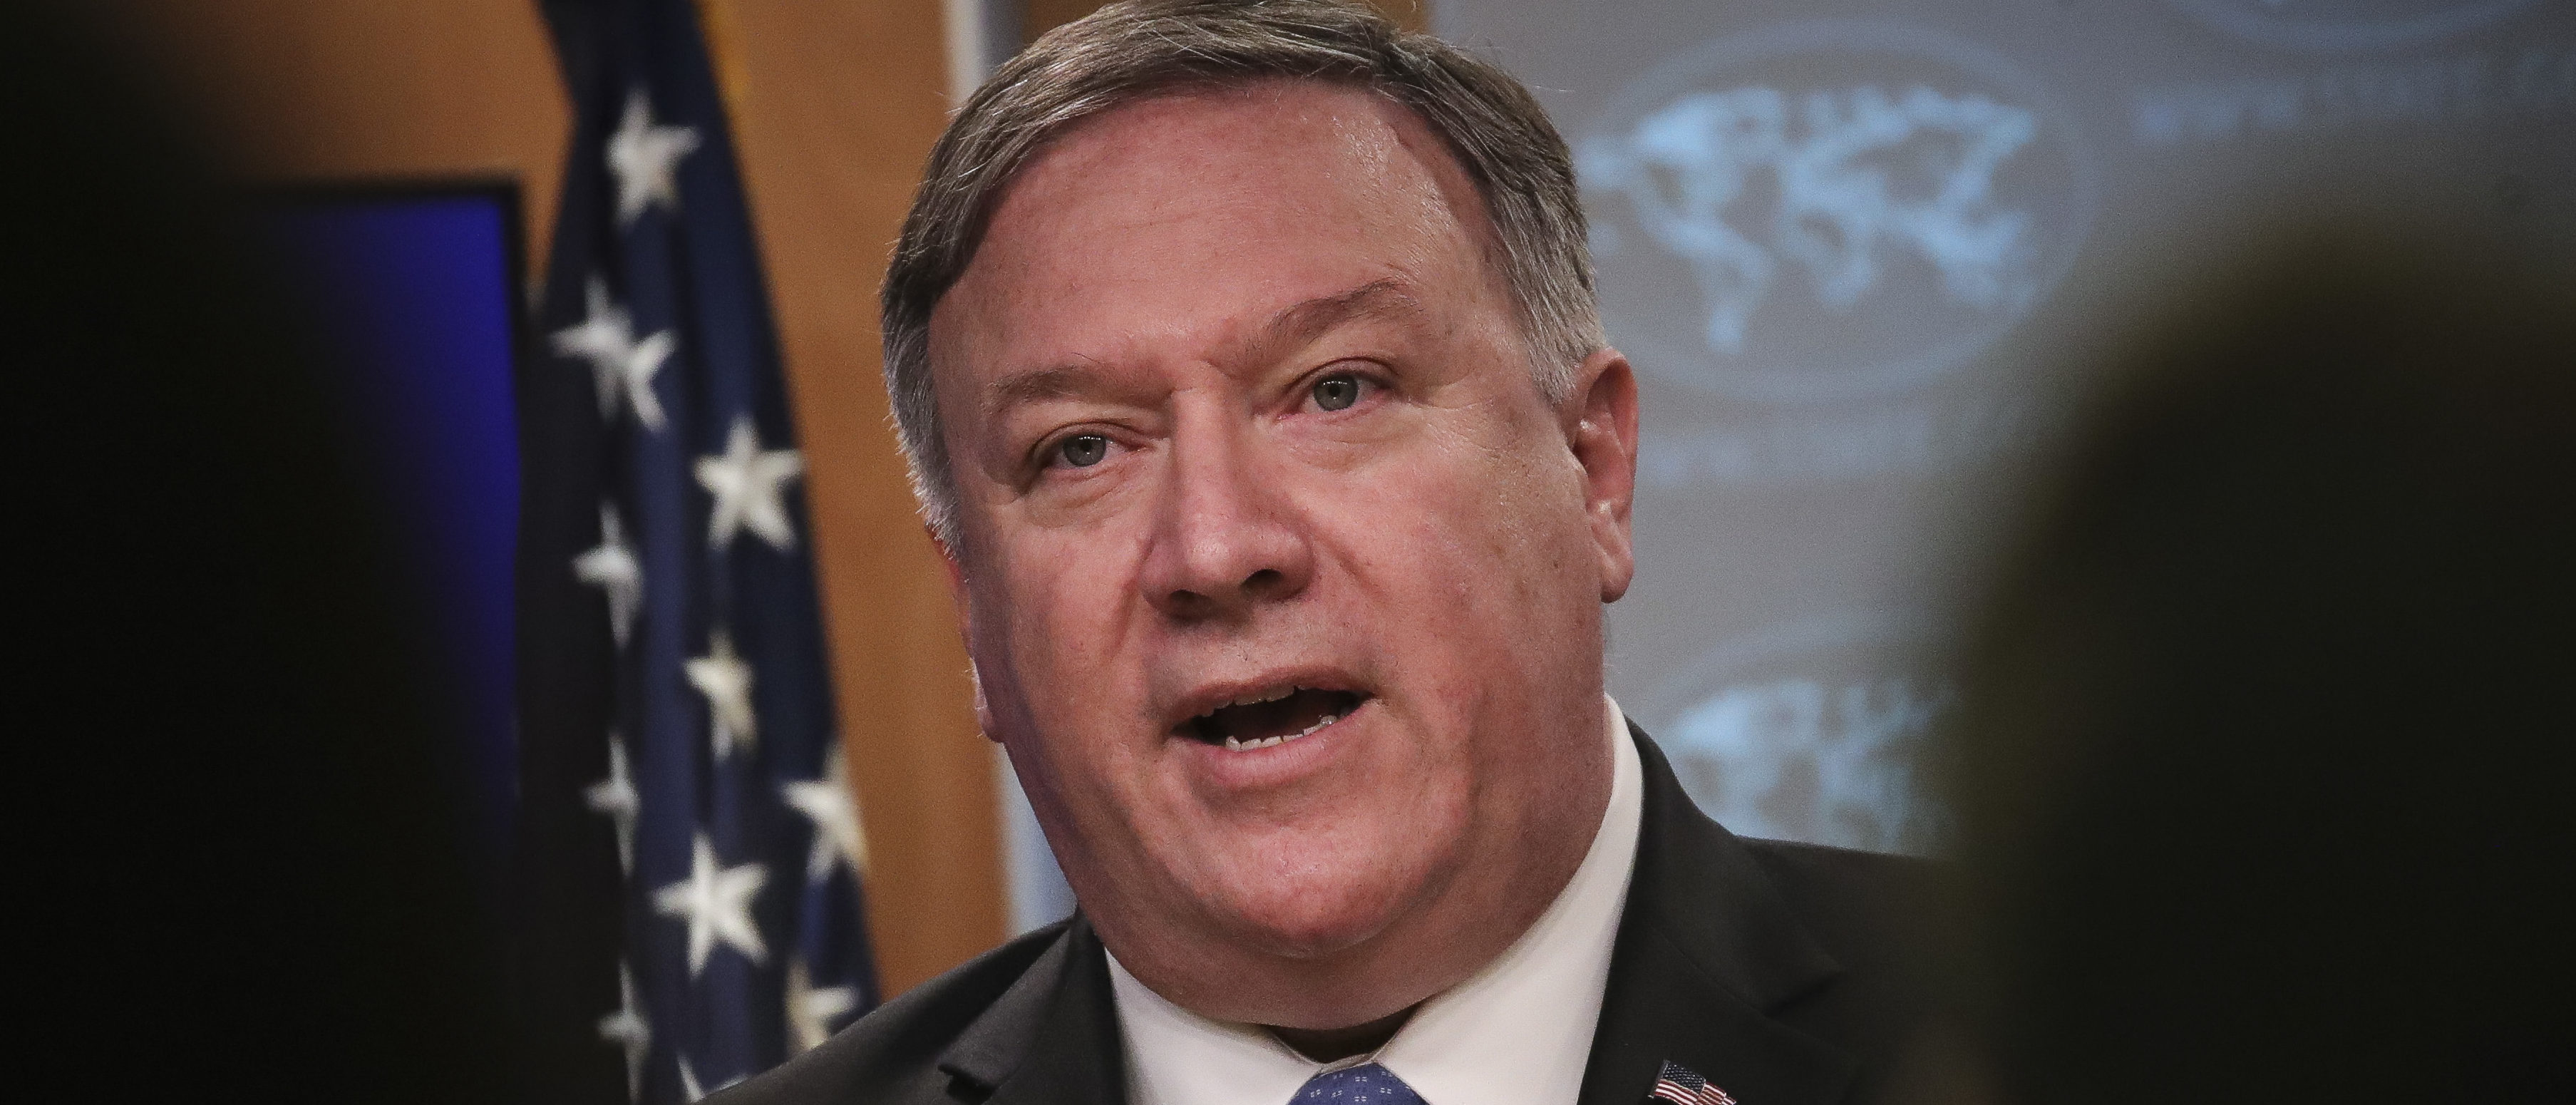 U.S. Secretary of State Mike Pompeo speaks about the Trump administration's Cuba policy during a press briefing at the U.S. Department of State, April 17, 2019 in Washington, D.C. (Photo by Drew Angerer/Getty Images)